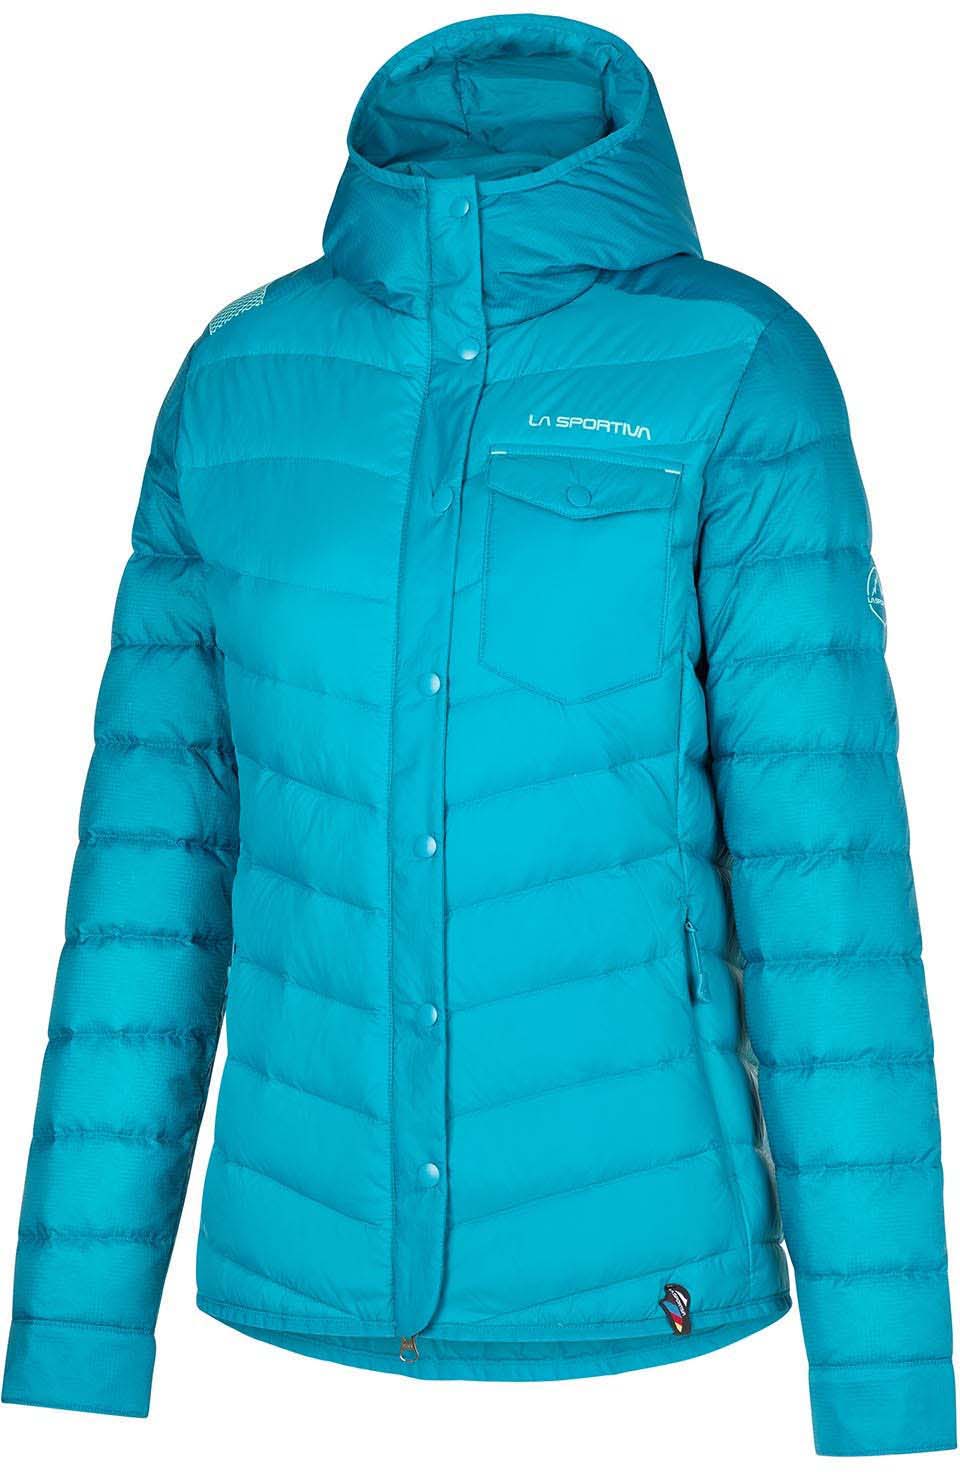 La Sportiva Wild Down Jacket - Women's , Up to 64% Off with Free S&H —  CampSaver